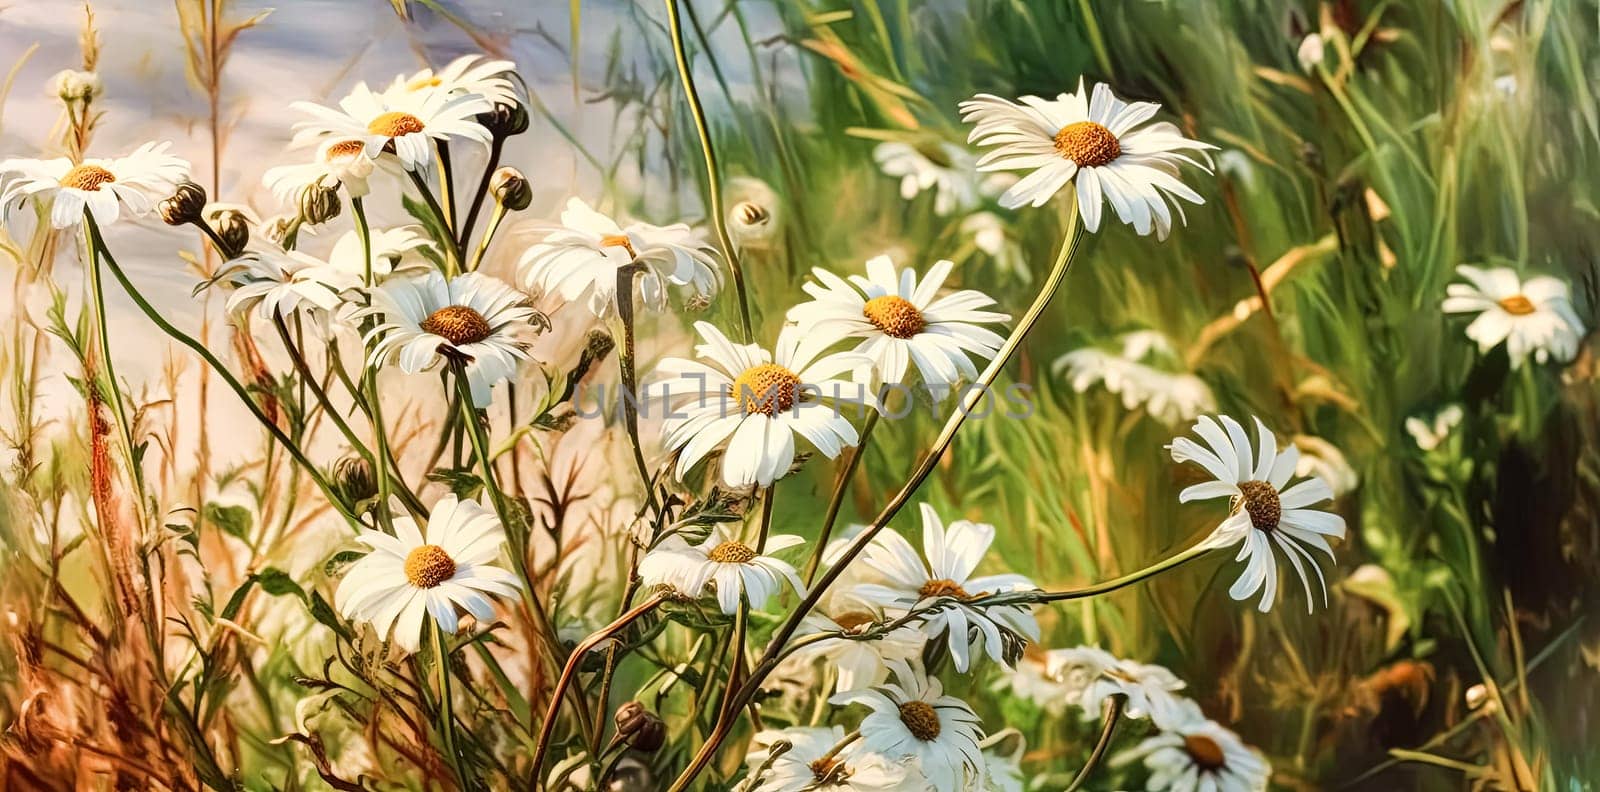 Close up soft focus nature background featuring wild camomile flowers. Capturing the delicate beauty of nature up close.